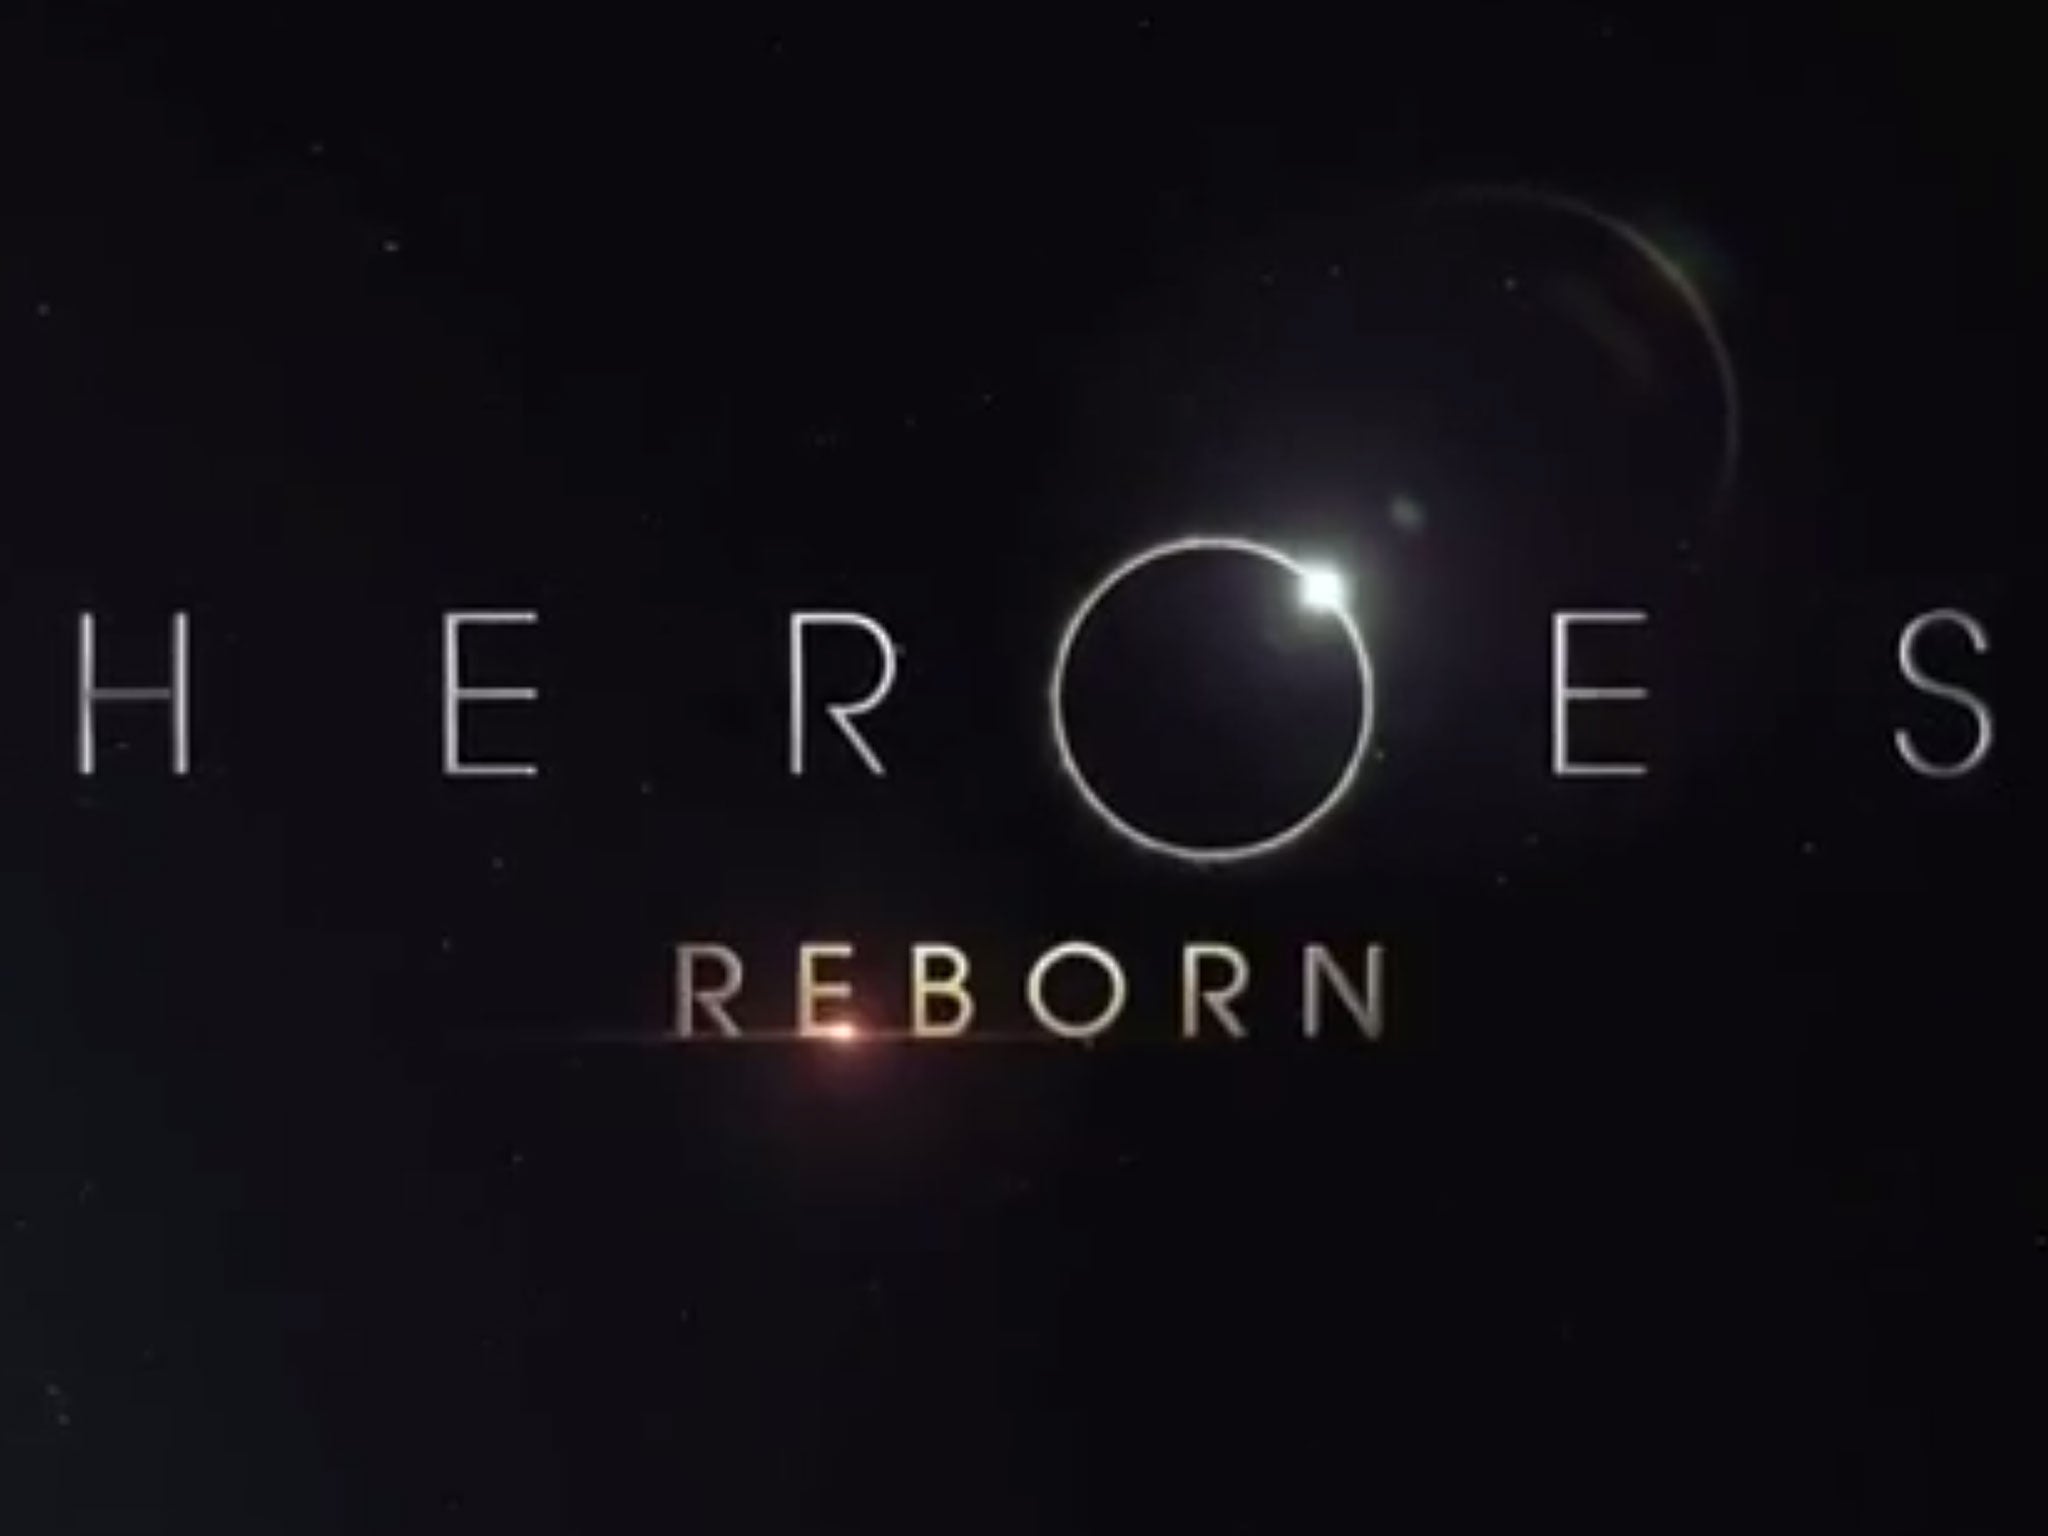 A still from the Heroes Reborn teaser